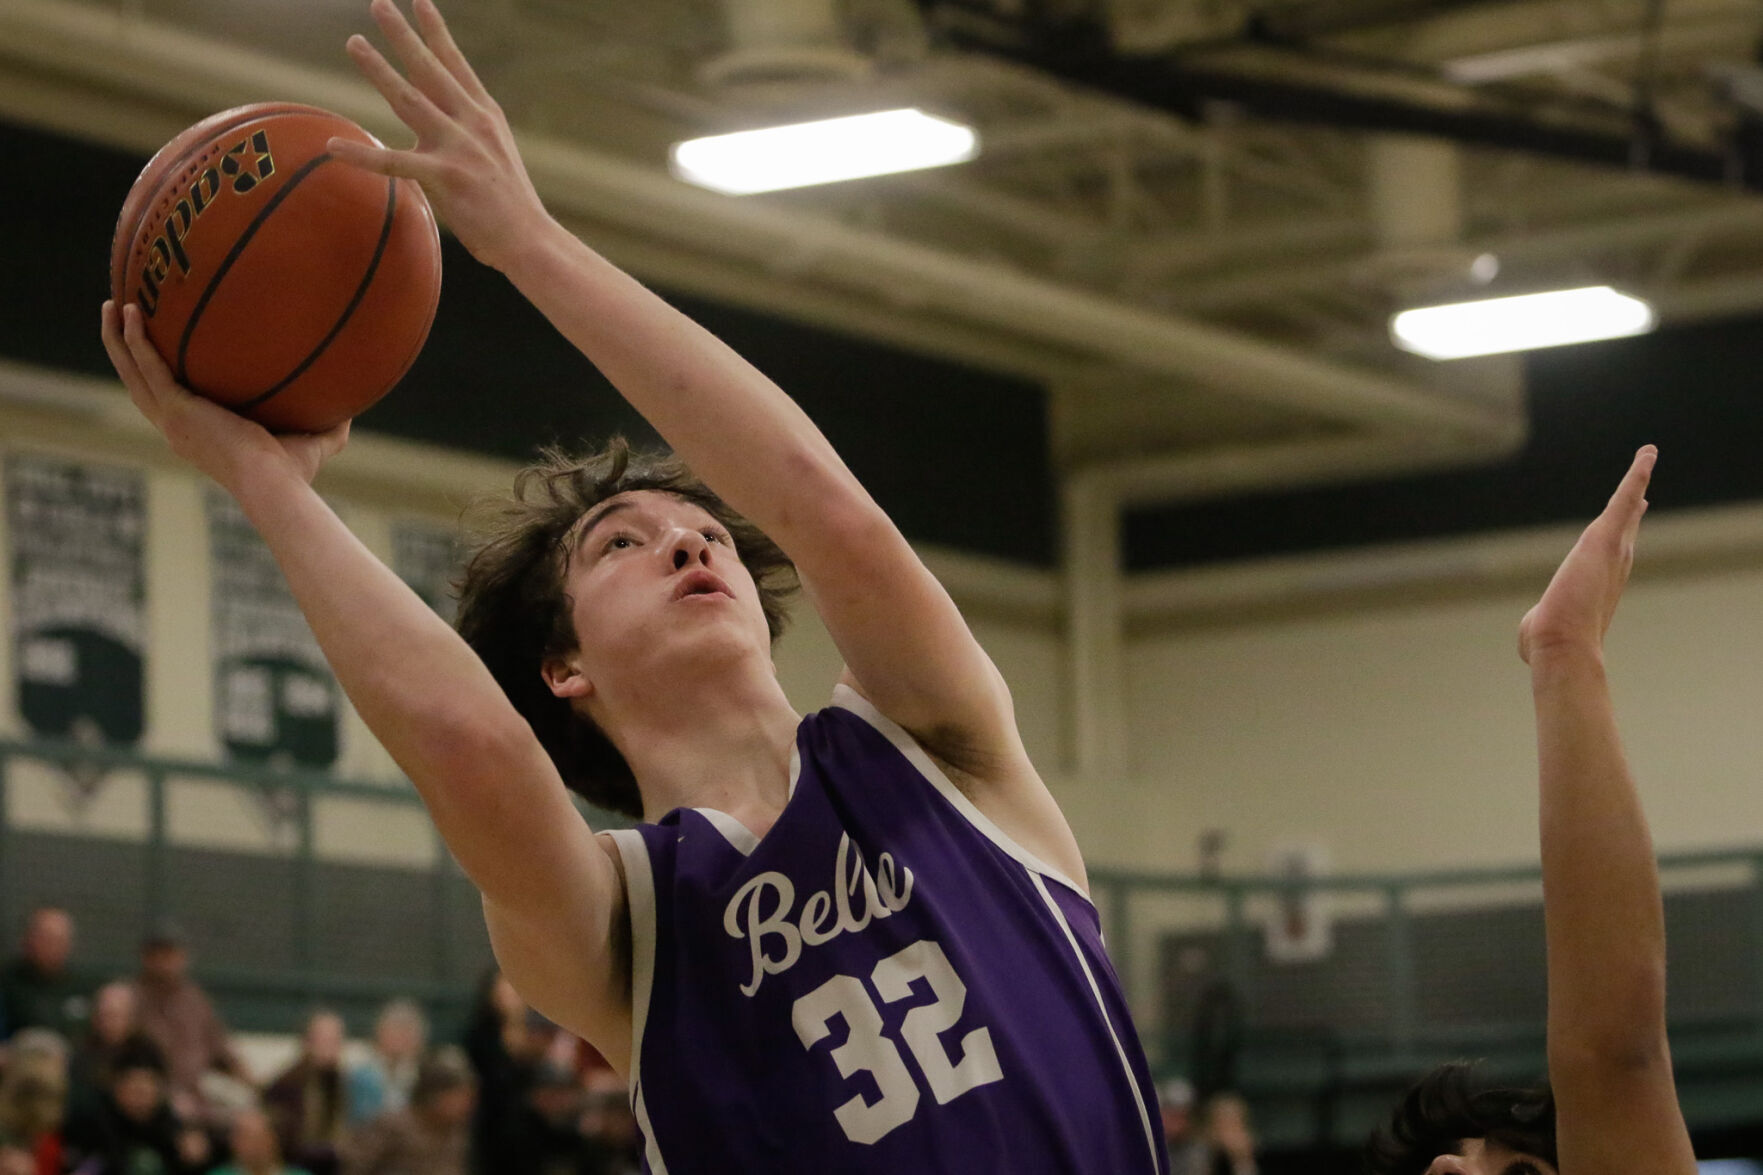 Belle Fourche Boys Basketball Team Wins First Game of the Season with Home Victory